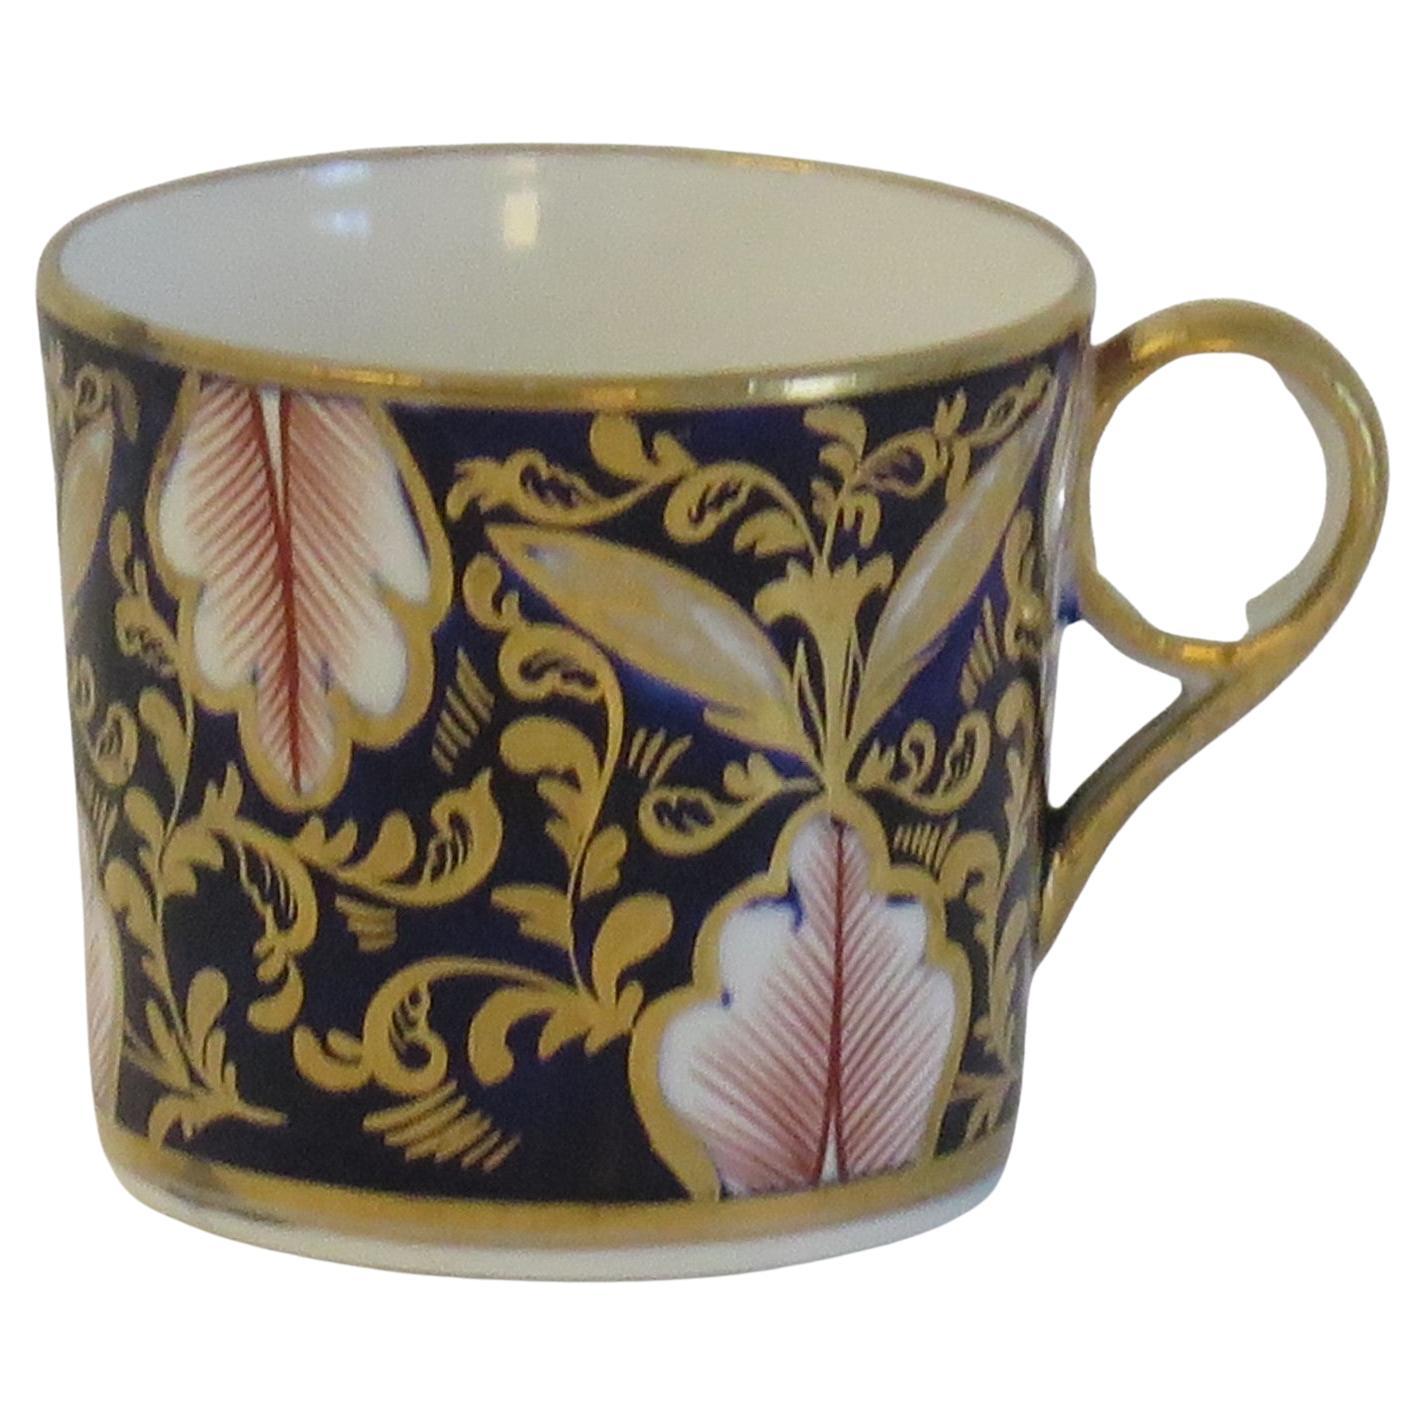 Georgian Minton Porcelain Coffee Can Hand Painted in Pattern 641, Ca 1805